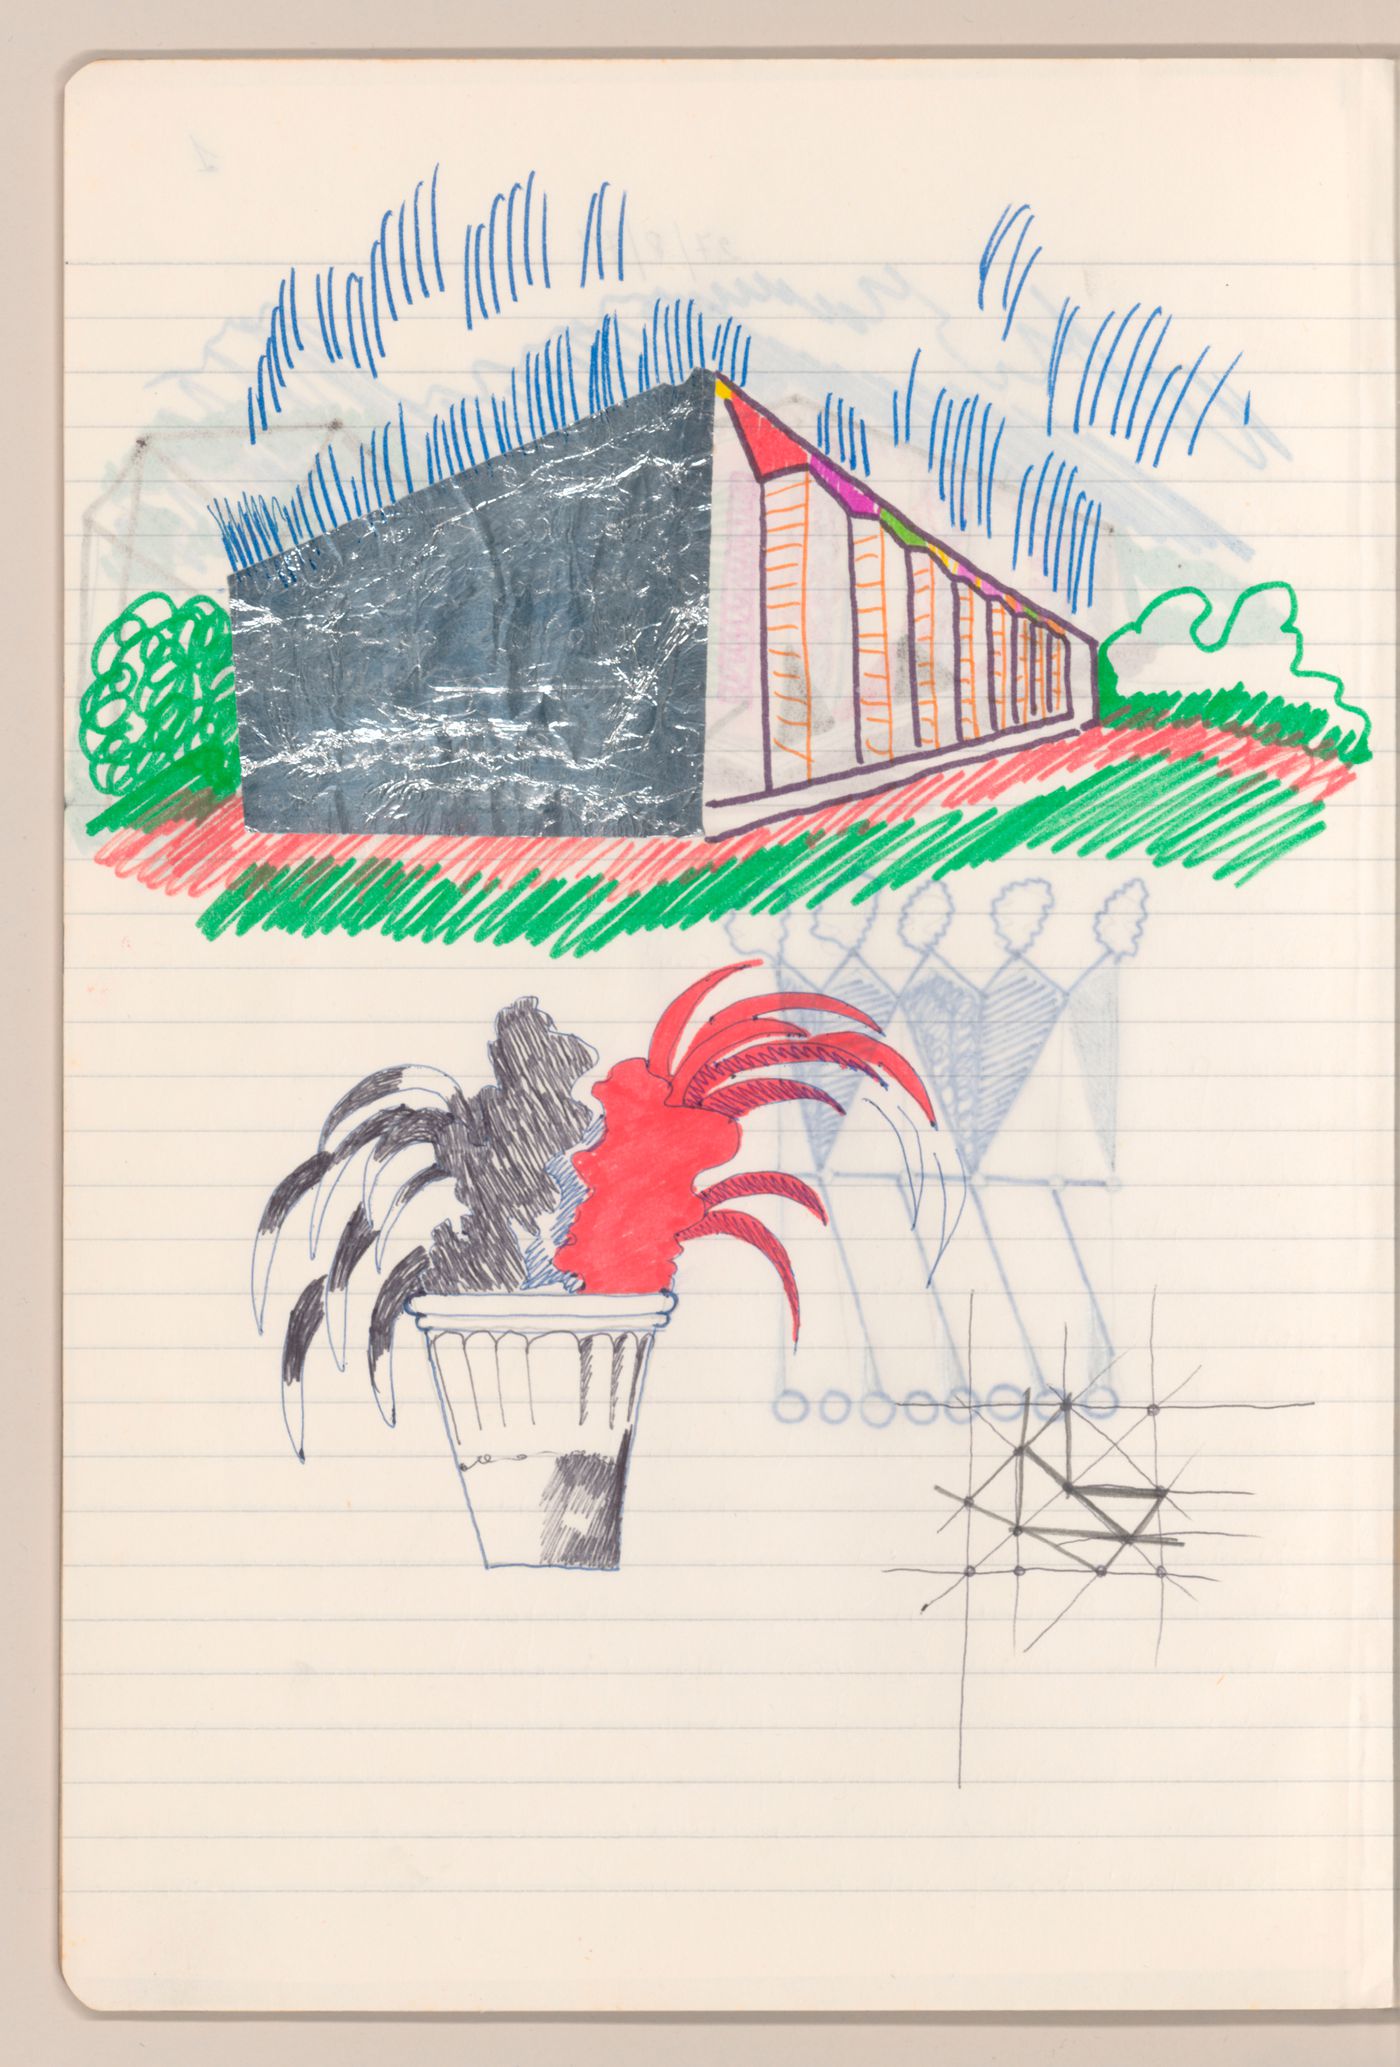 Sketchbook with drawings, collages, and texts on various projects, including material culture